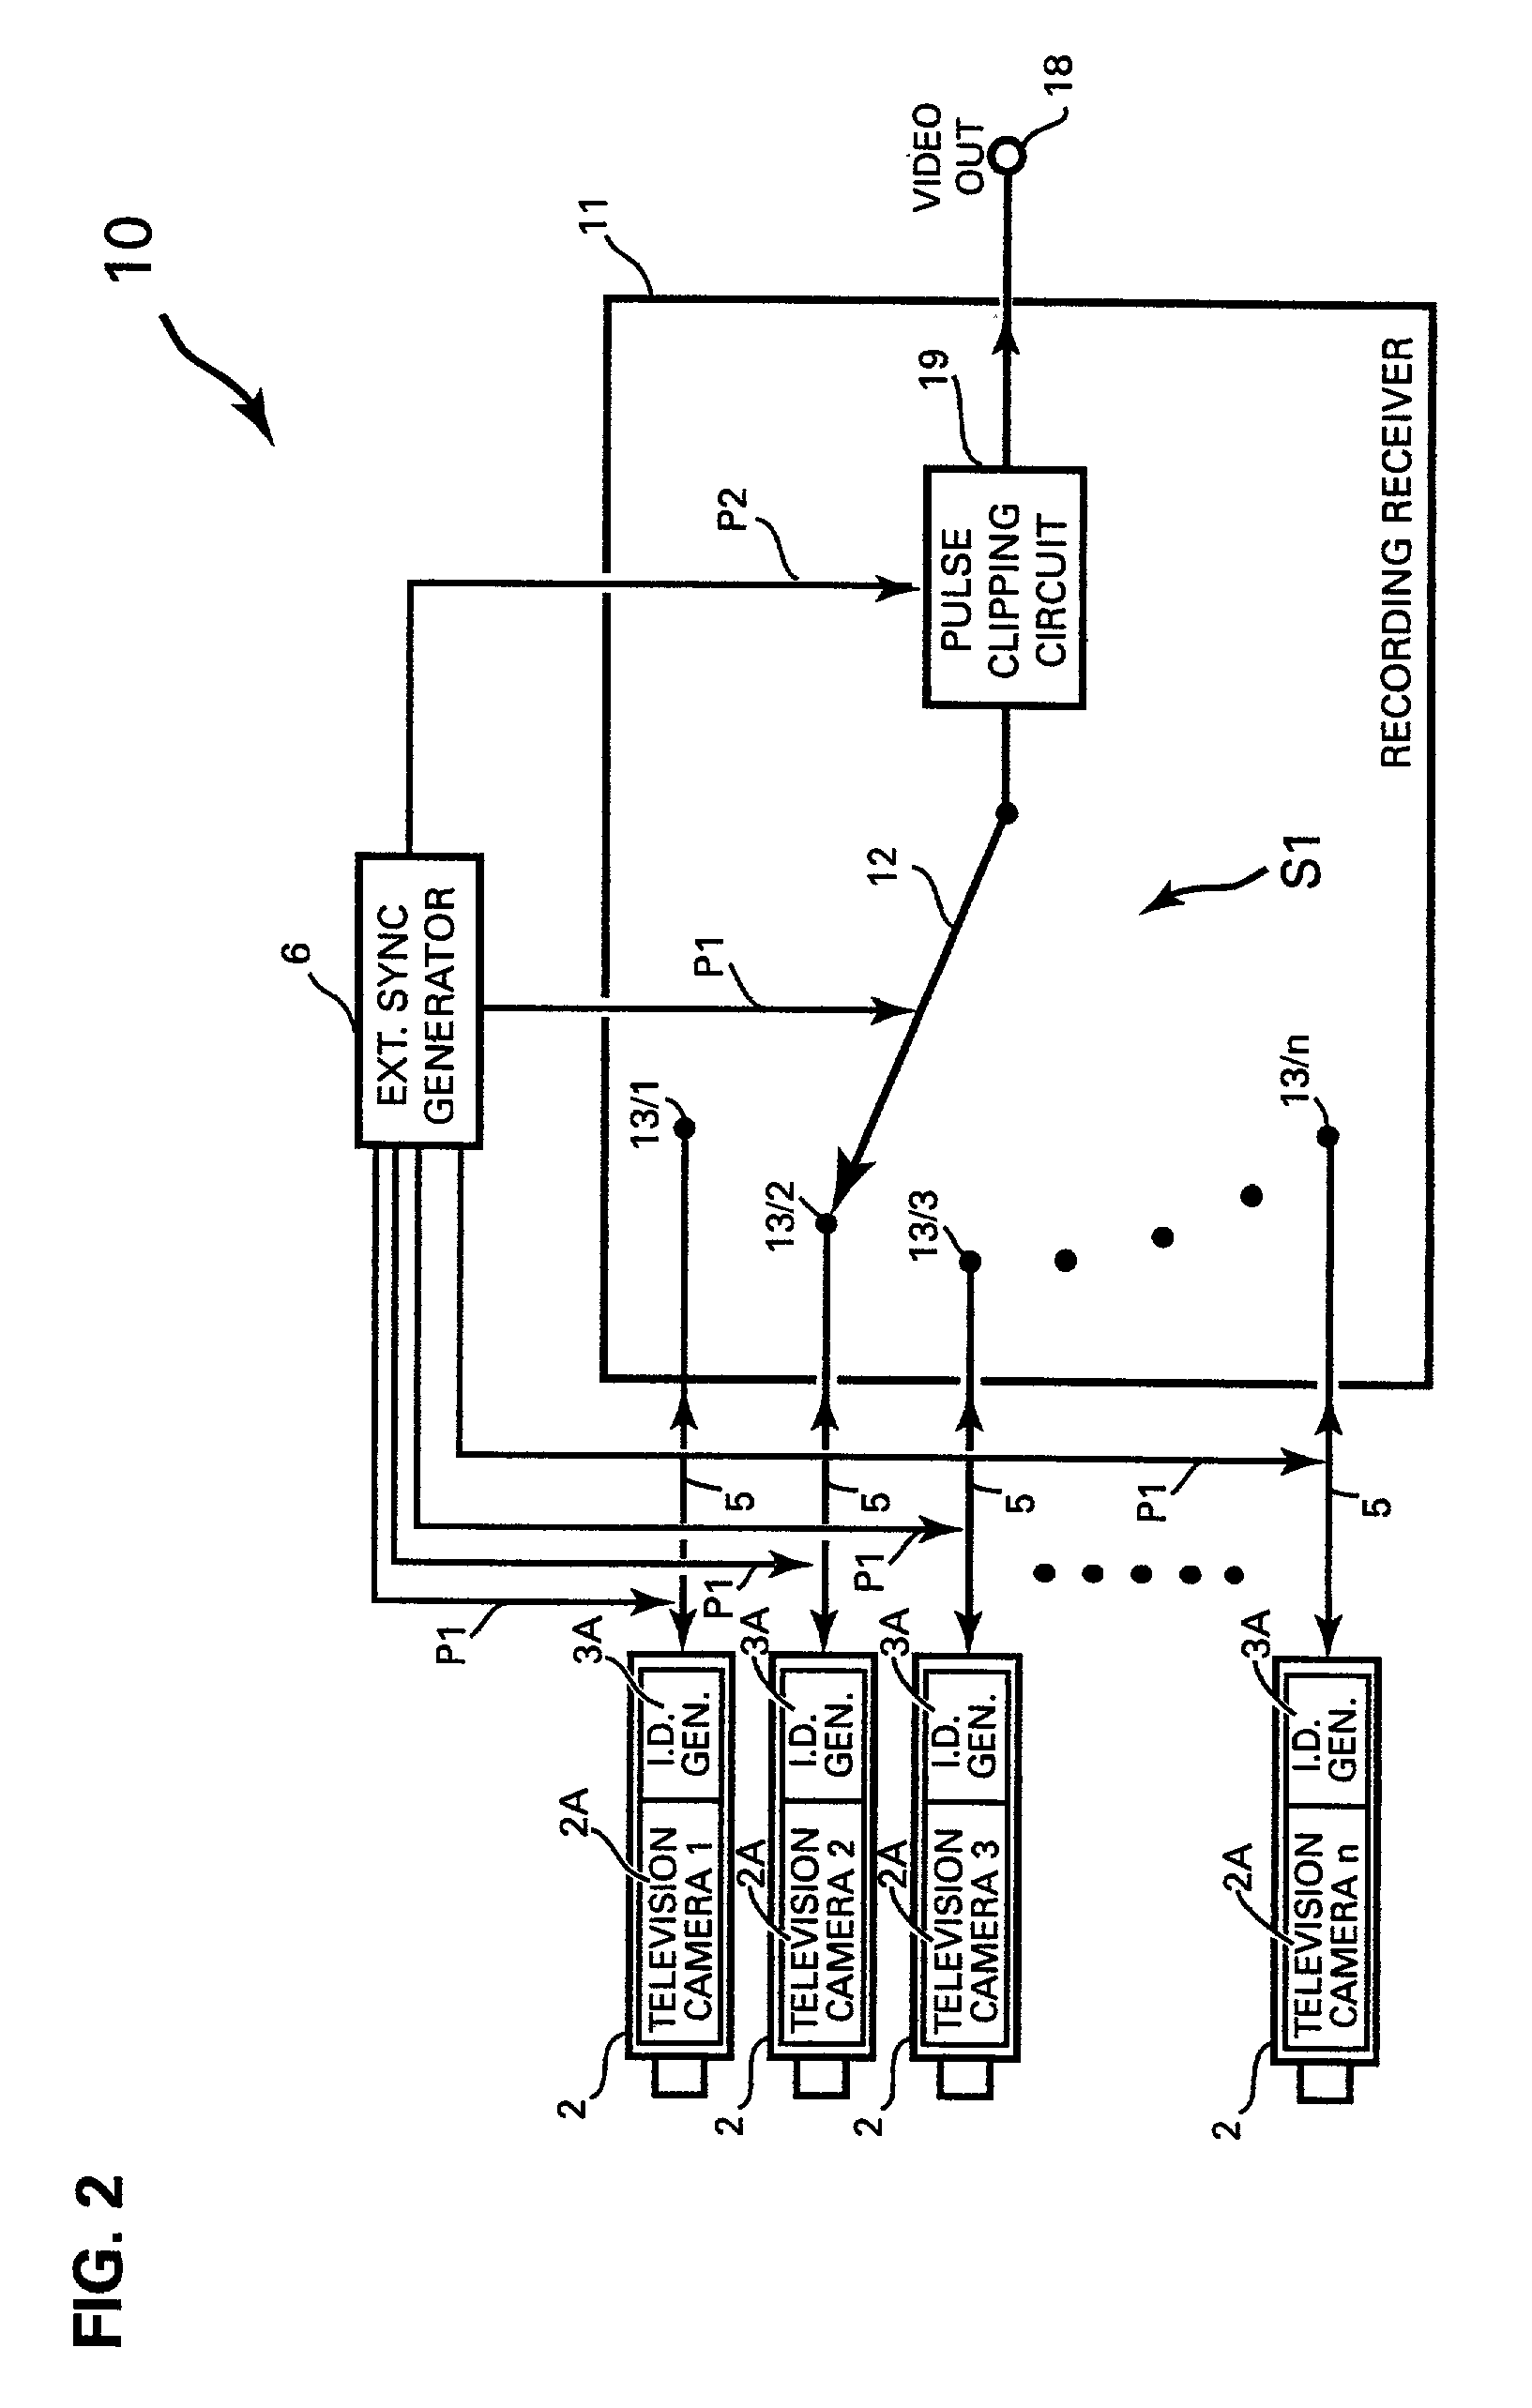 Method and apparatus for processing, digitally recording and retrieving a plurality of video signals